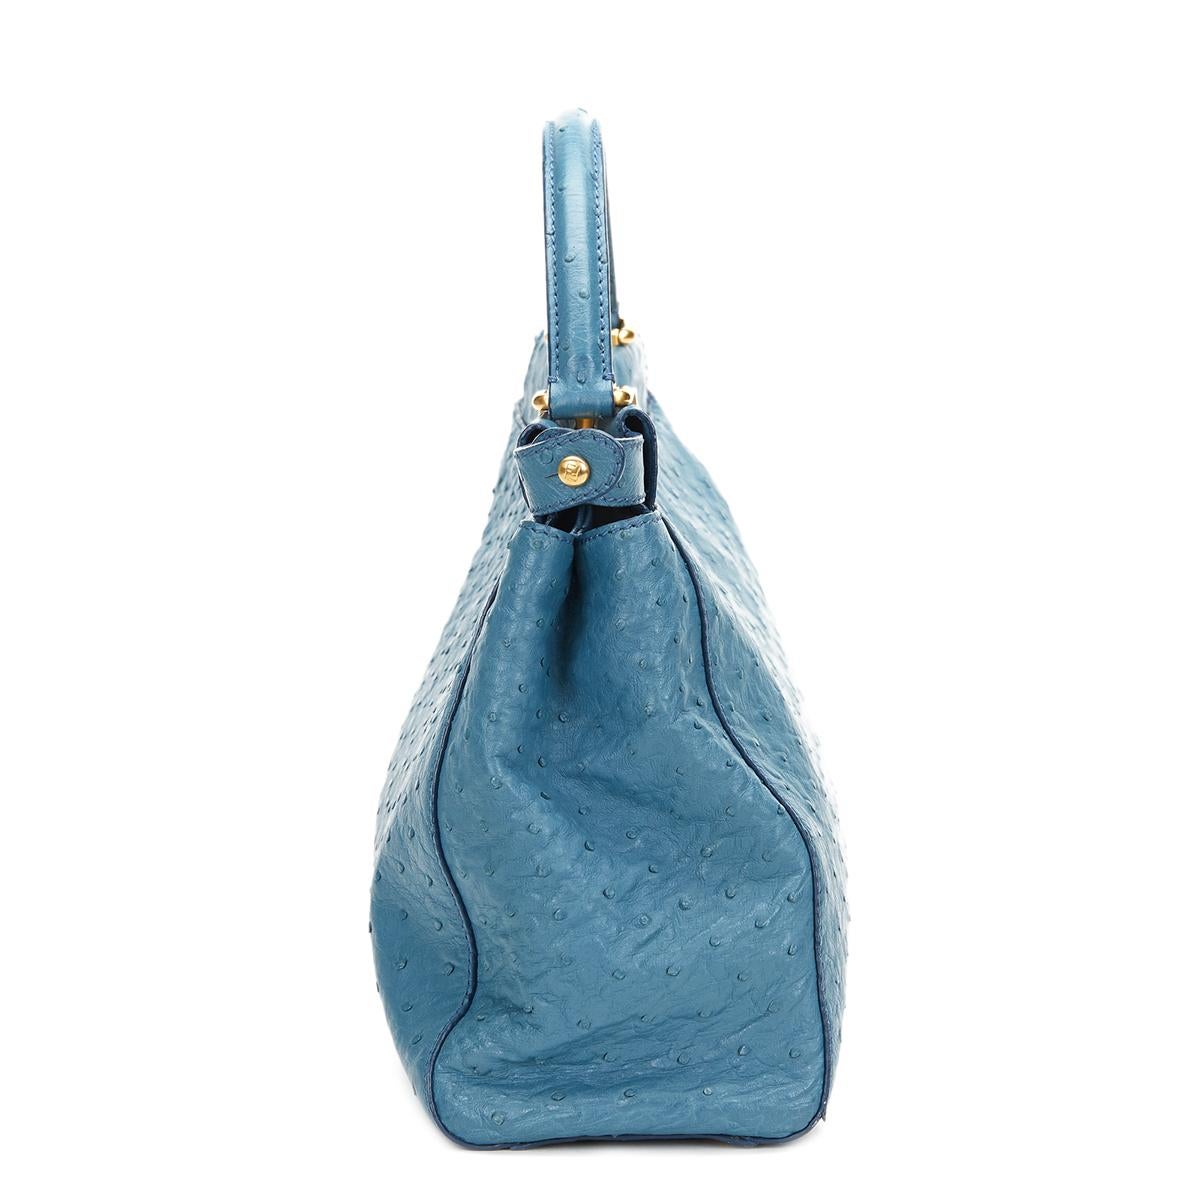 FENDI
Blue Ostrich Leather Small Peekaboo

Xupes Reference: HB439
Serial Number: 8BN226-A9P129-010
Age (Circa): 2000
Accompanied By: Shoulder Strap, Care Booklet
Authenticity Details: Serial Tags (Made in Italy)
Gender: Ladies
Type: Top Handle,